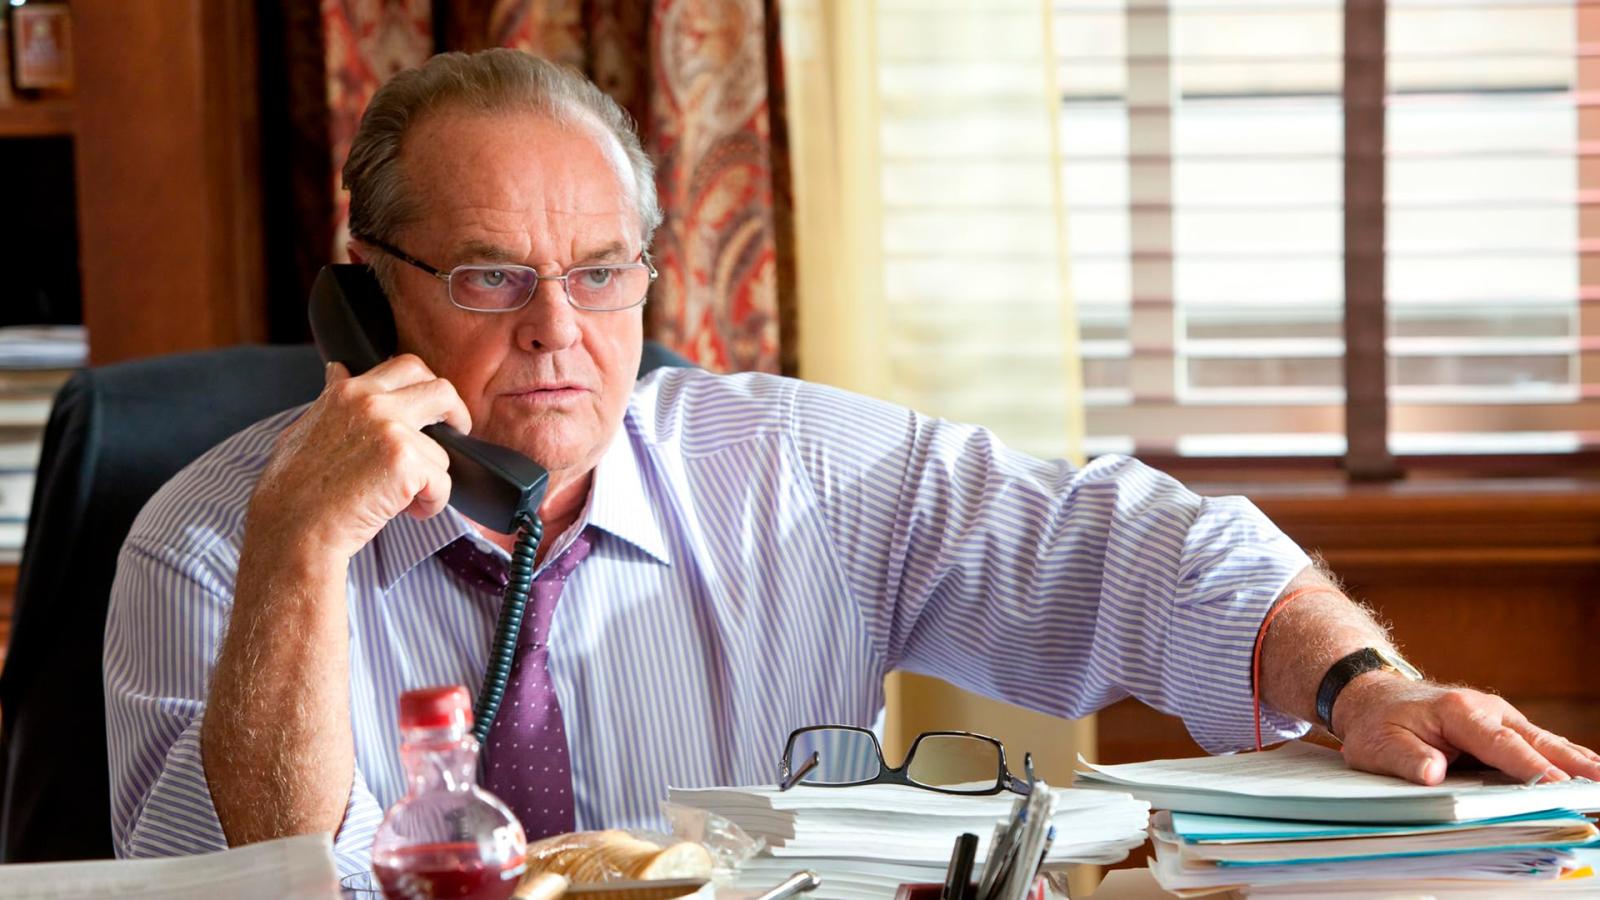 Jack Nicholson Hasn't Appeared On Big Screen In 13 Years For a Surprisingly Relatable Reason - image 1